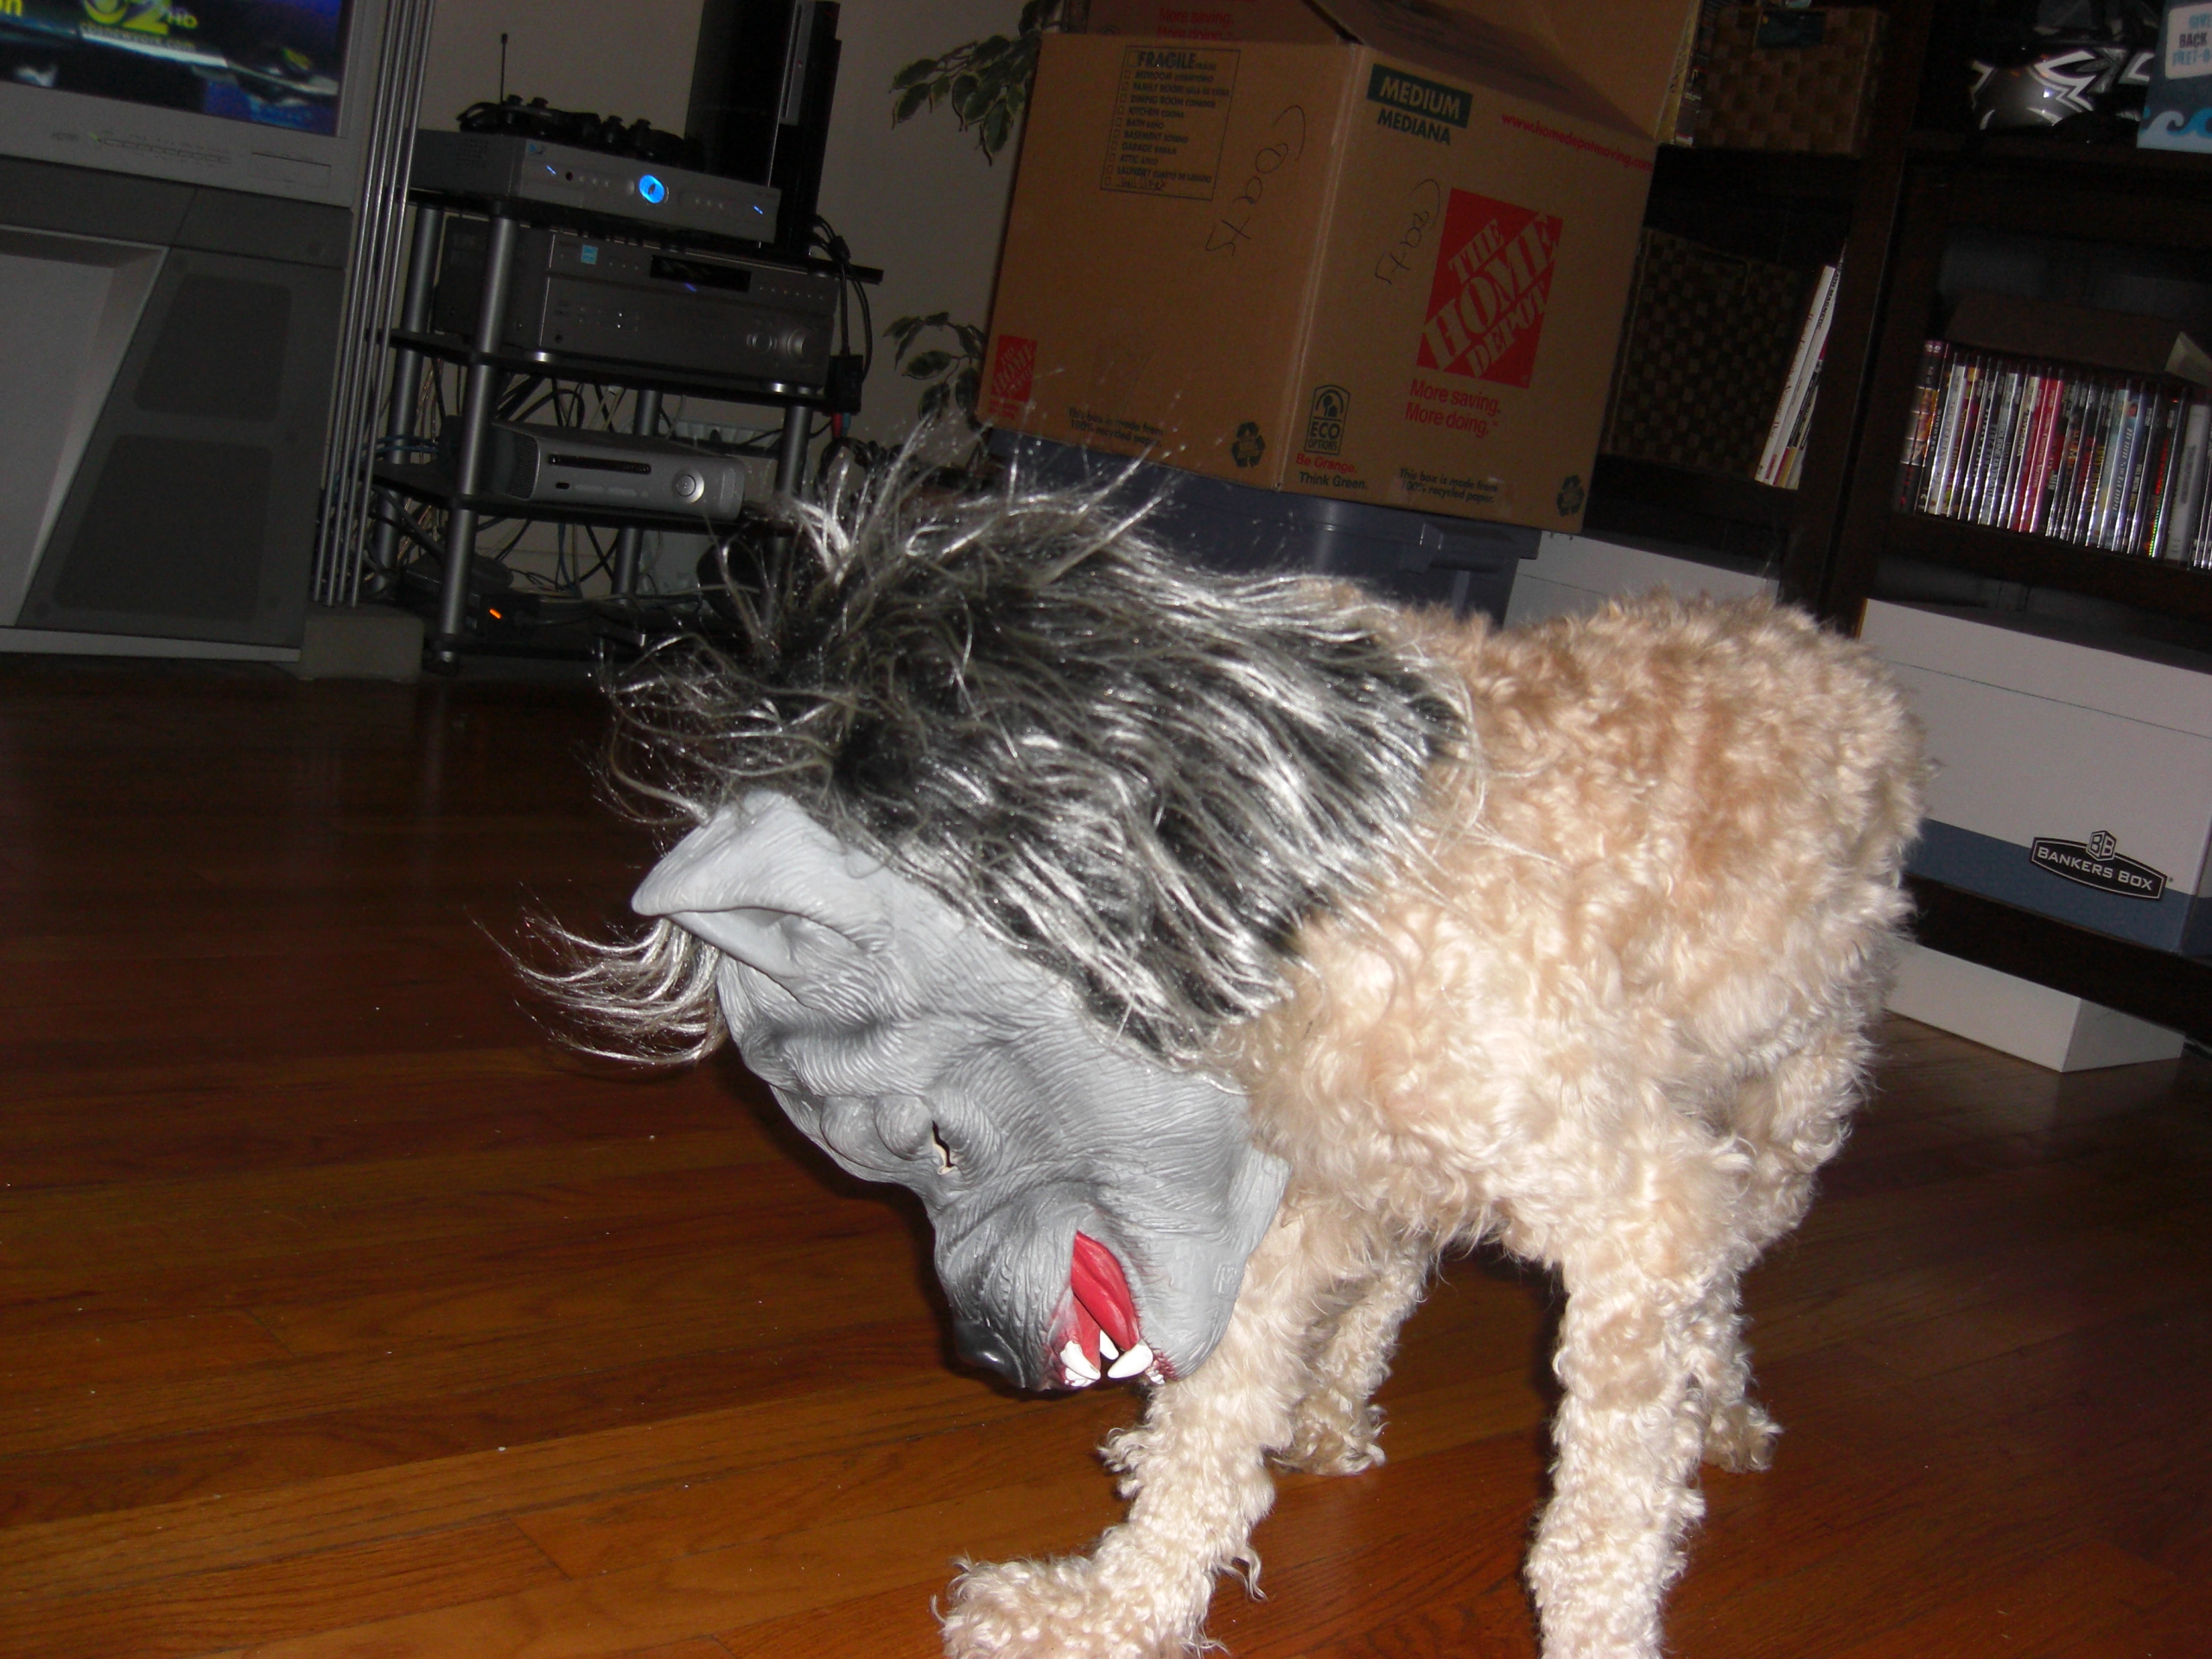 stacy-traktmans-mr-pickles-trying-to-be-a-wolf-for-halloween-in-clark-nj.jpg 